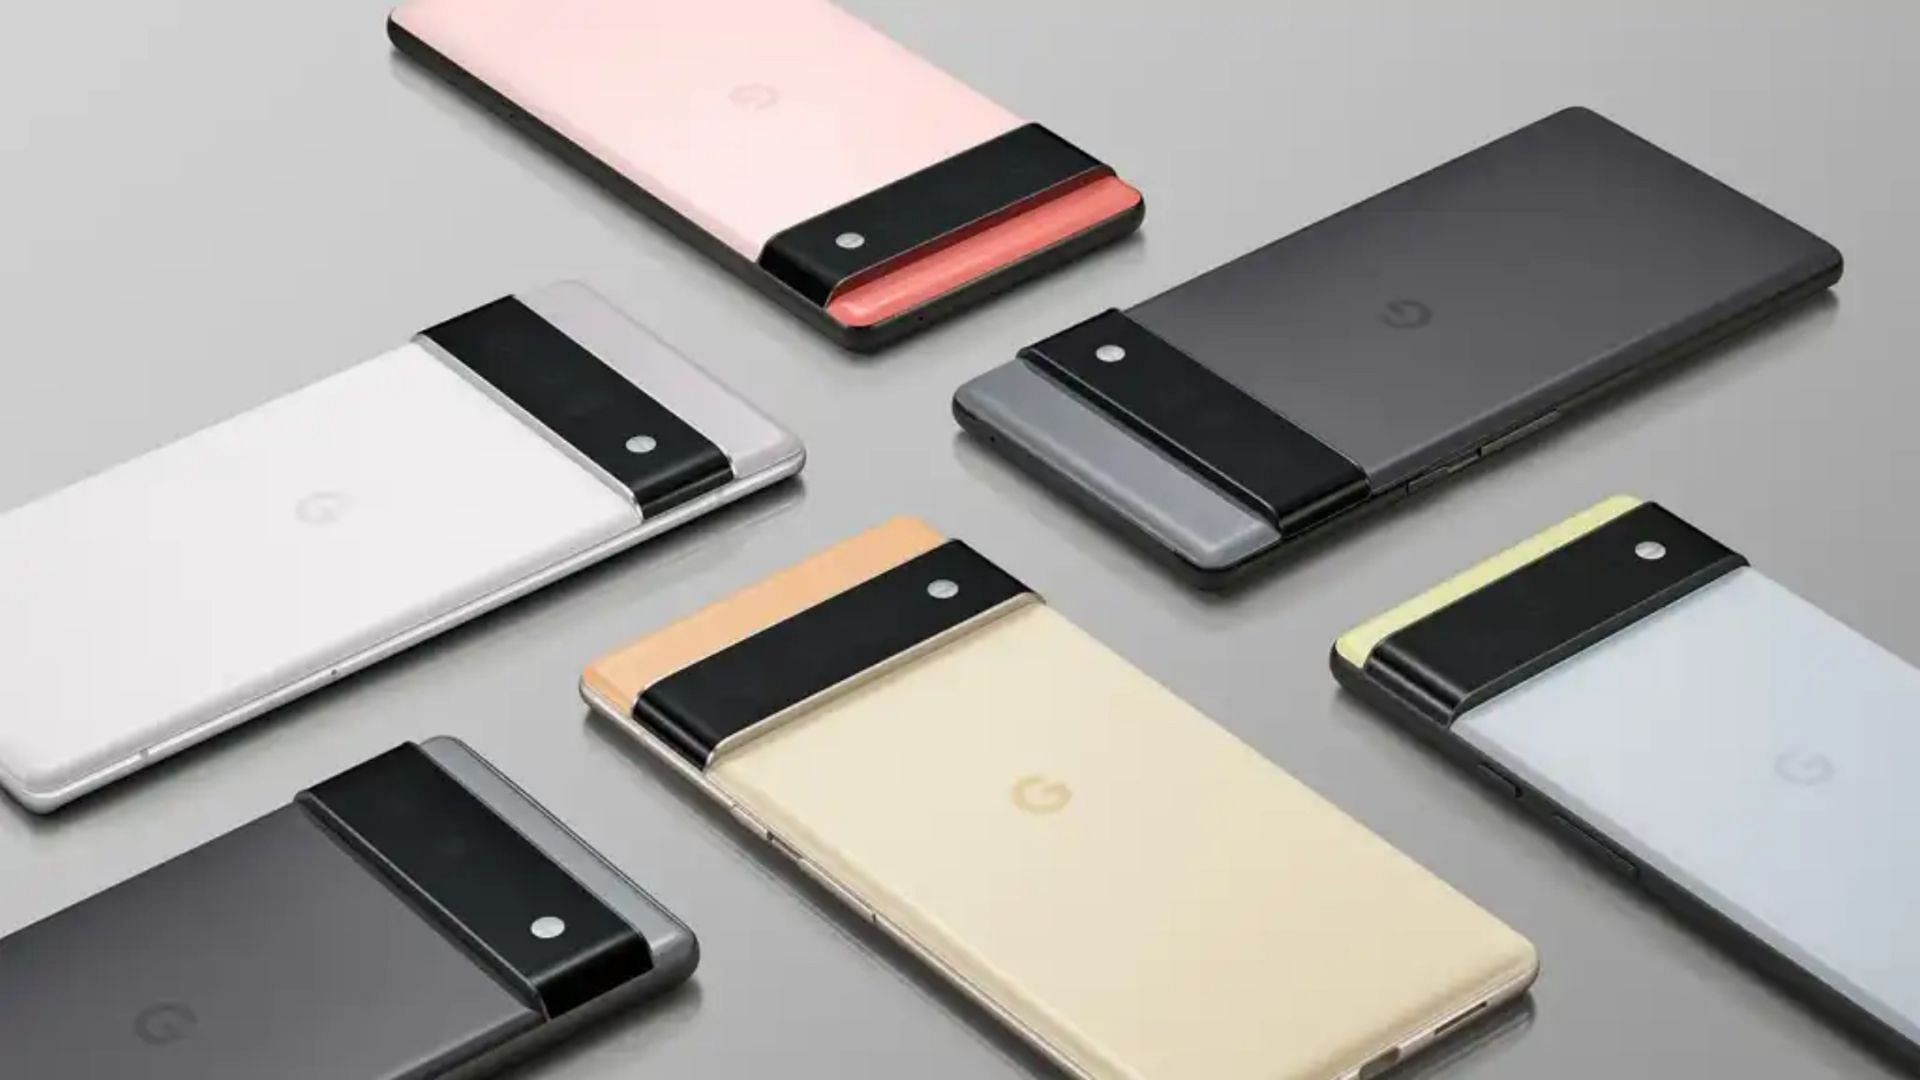 The Google Pixel 6 is expected to perform robustly even in 2023 (Image via Google)